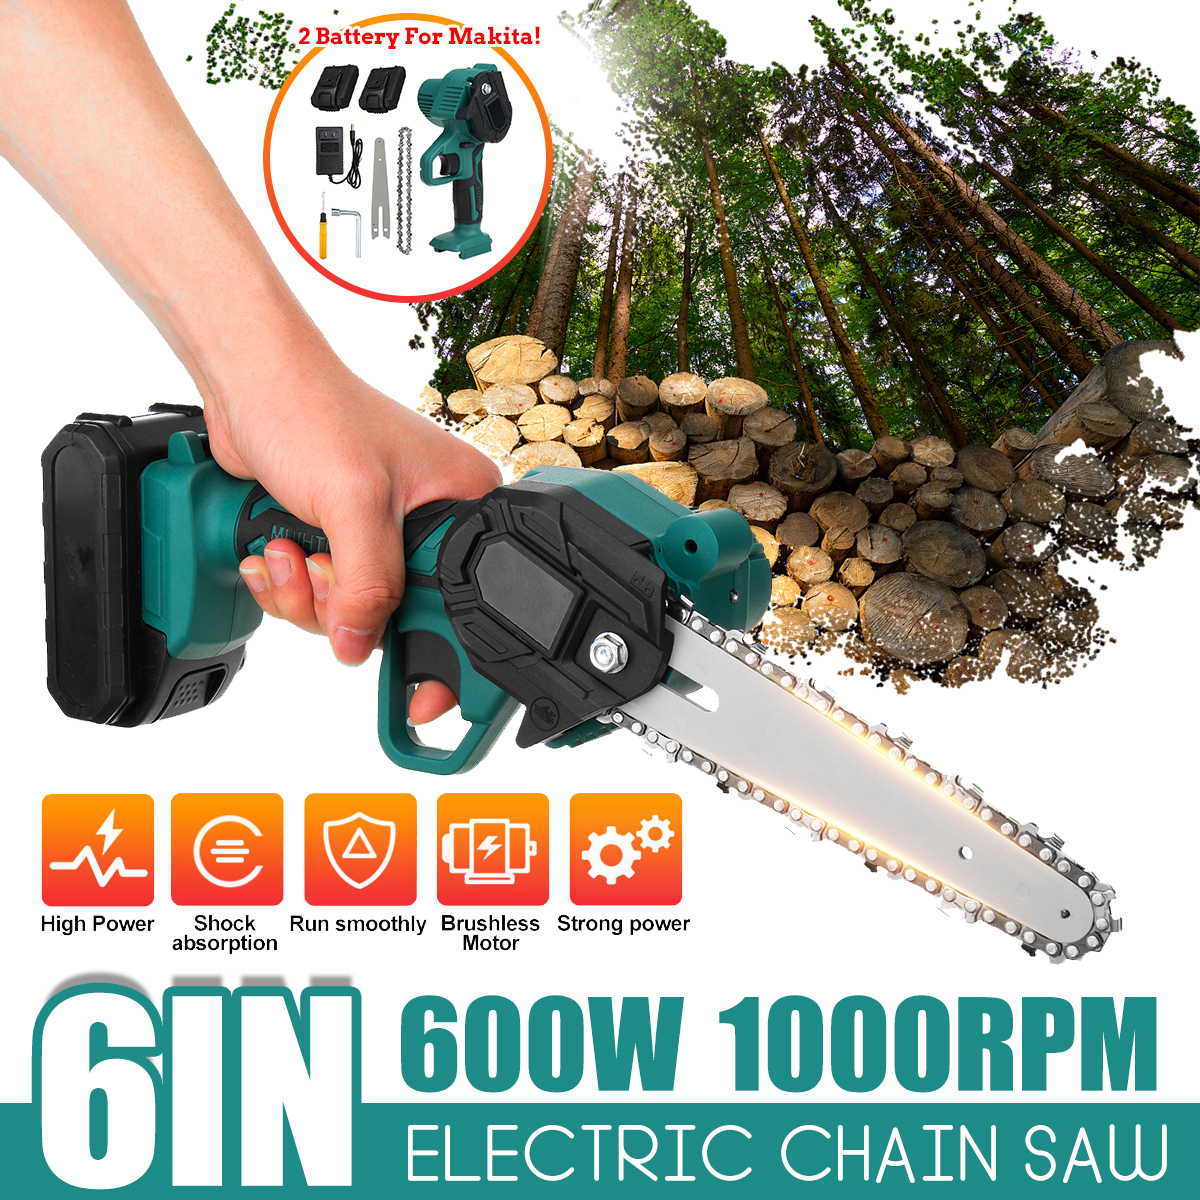 6inch-600W-Portable-Electric-Chain-Saw-Rechargeable-Saws-Wood-Cutter-Woodworking-Tool-W-2pcs-Battery-1827209-1